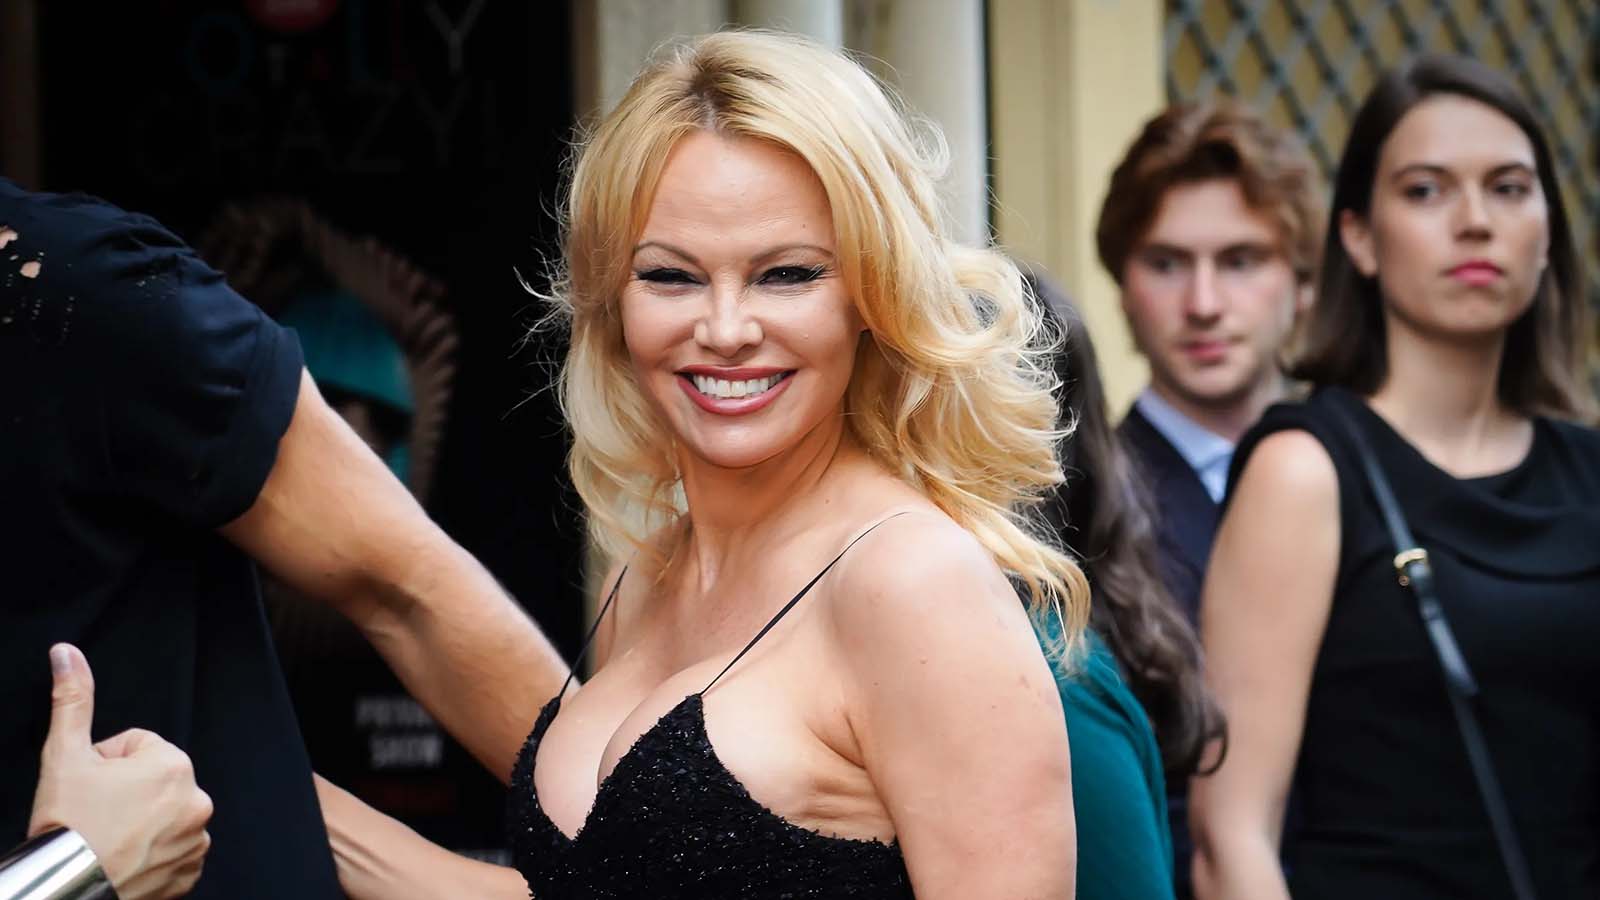 Pamela Anderson and her intimate relationship with gambling